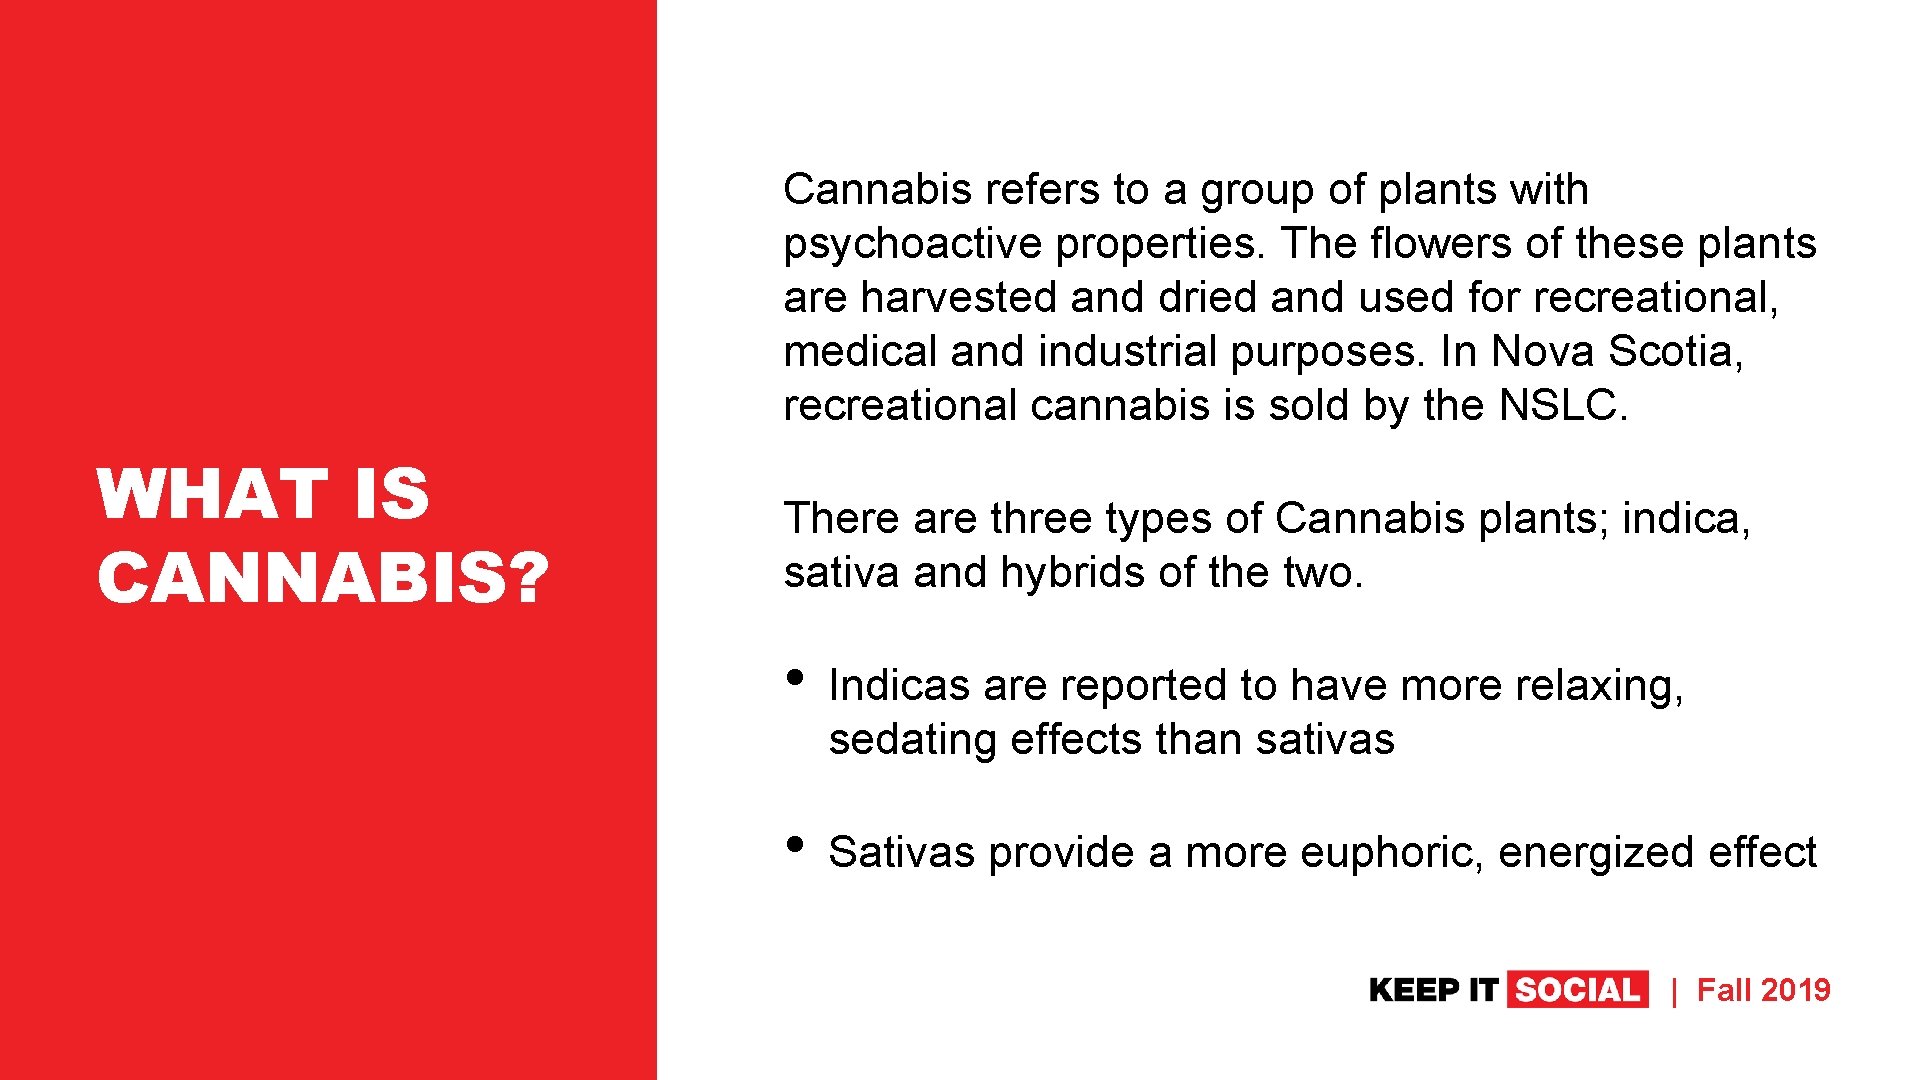 Cannabis refers to a group of plants with psychoactive properties. The flowers of these